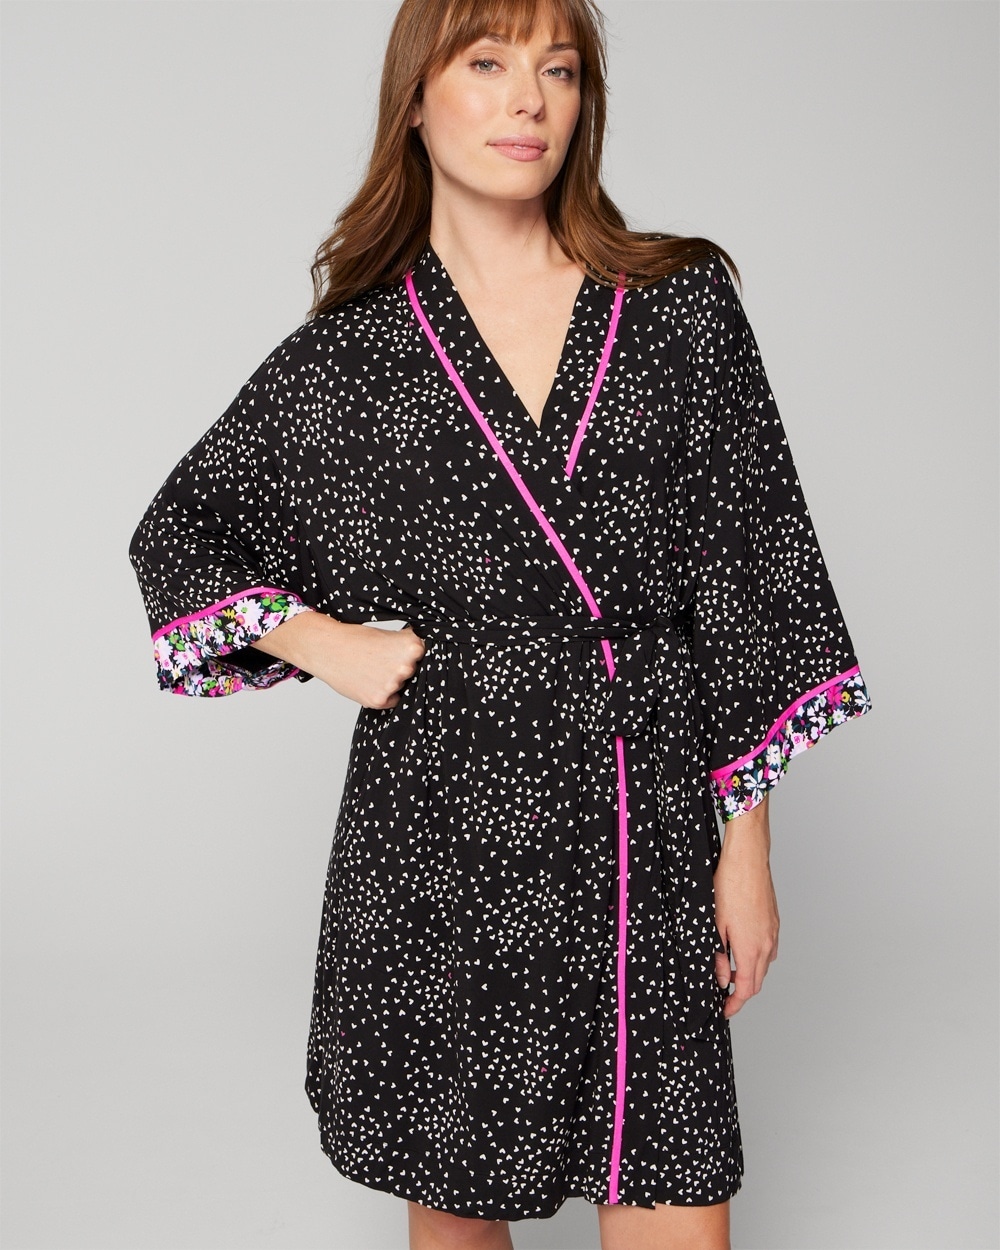 SOMA WOMEN'S COOL NIGHTS SHORT ROBE IN BLACK HEARTS SIZE LARGE/XL | SOMA